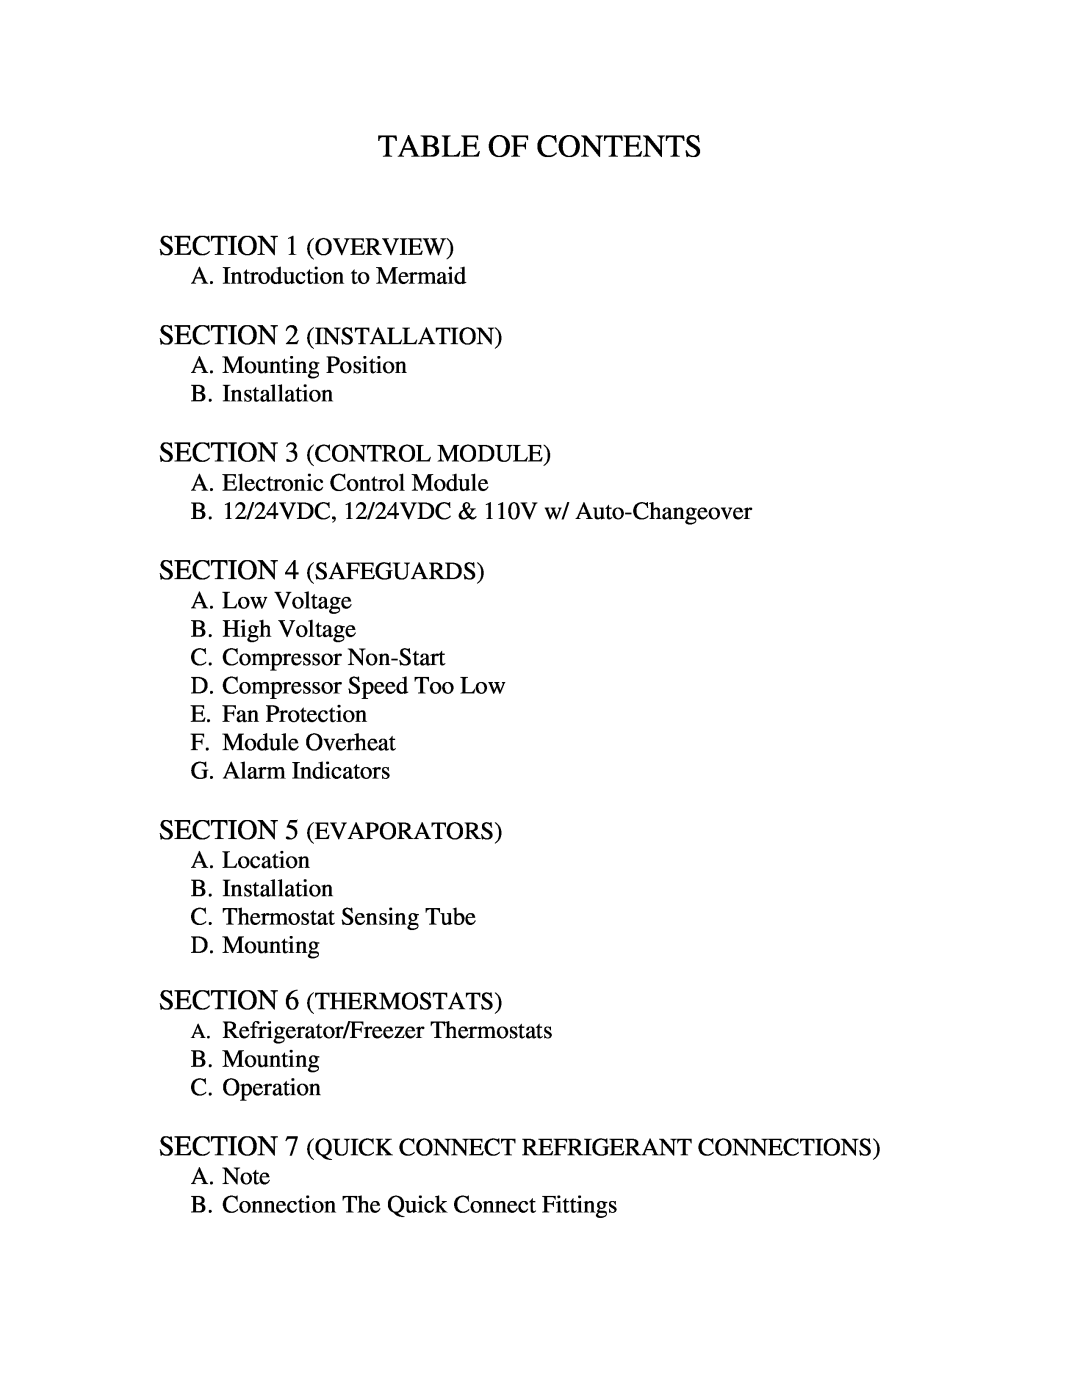 Mermaid REFRIGERATION/FREEZER installation instructions Table Of Contents, Overview 